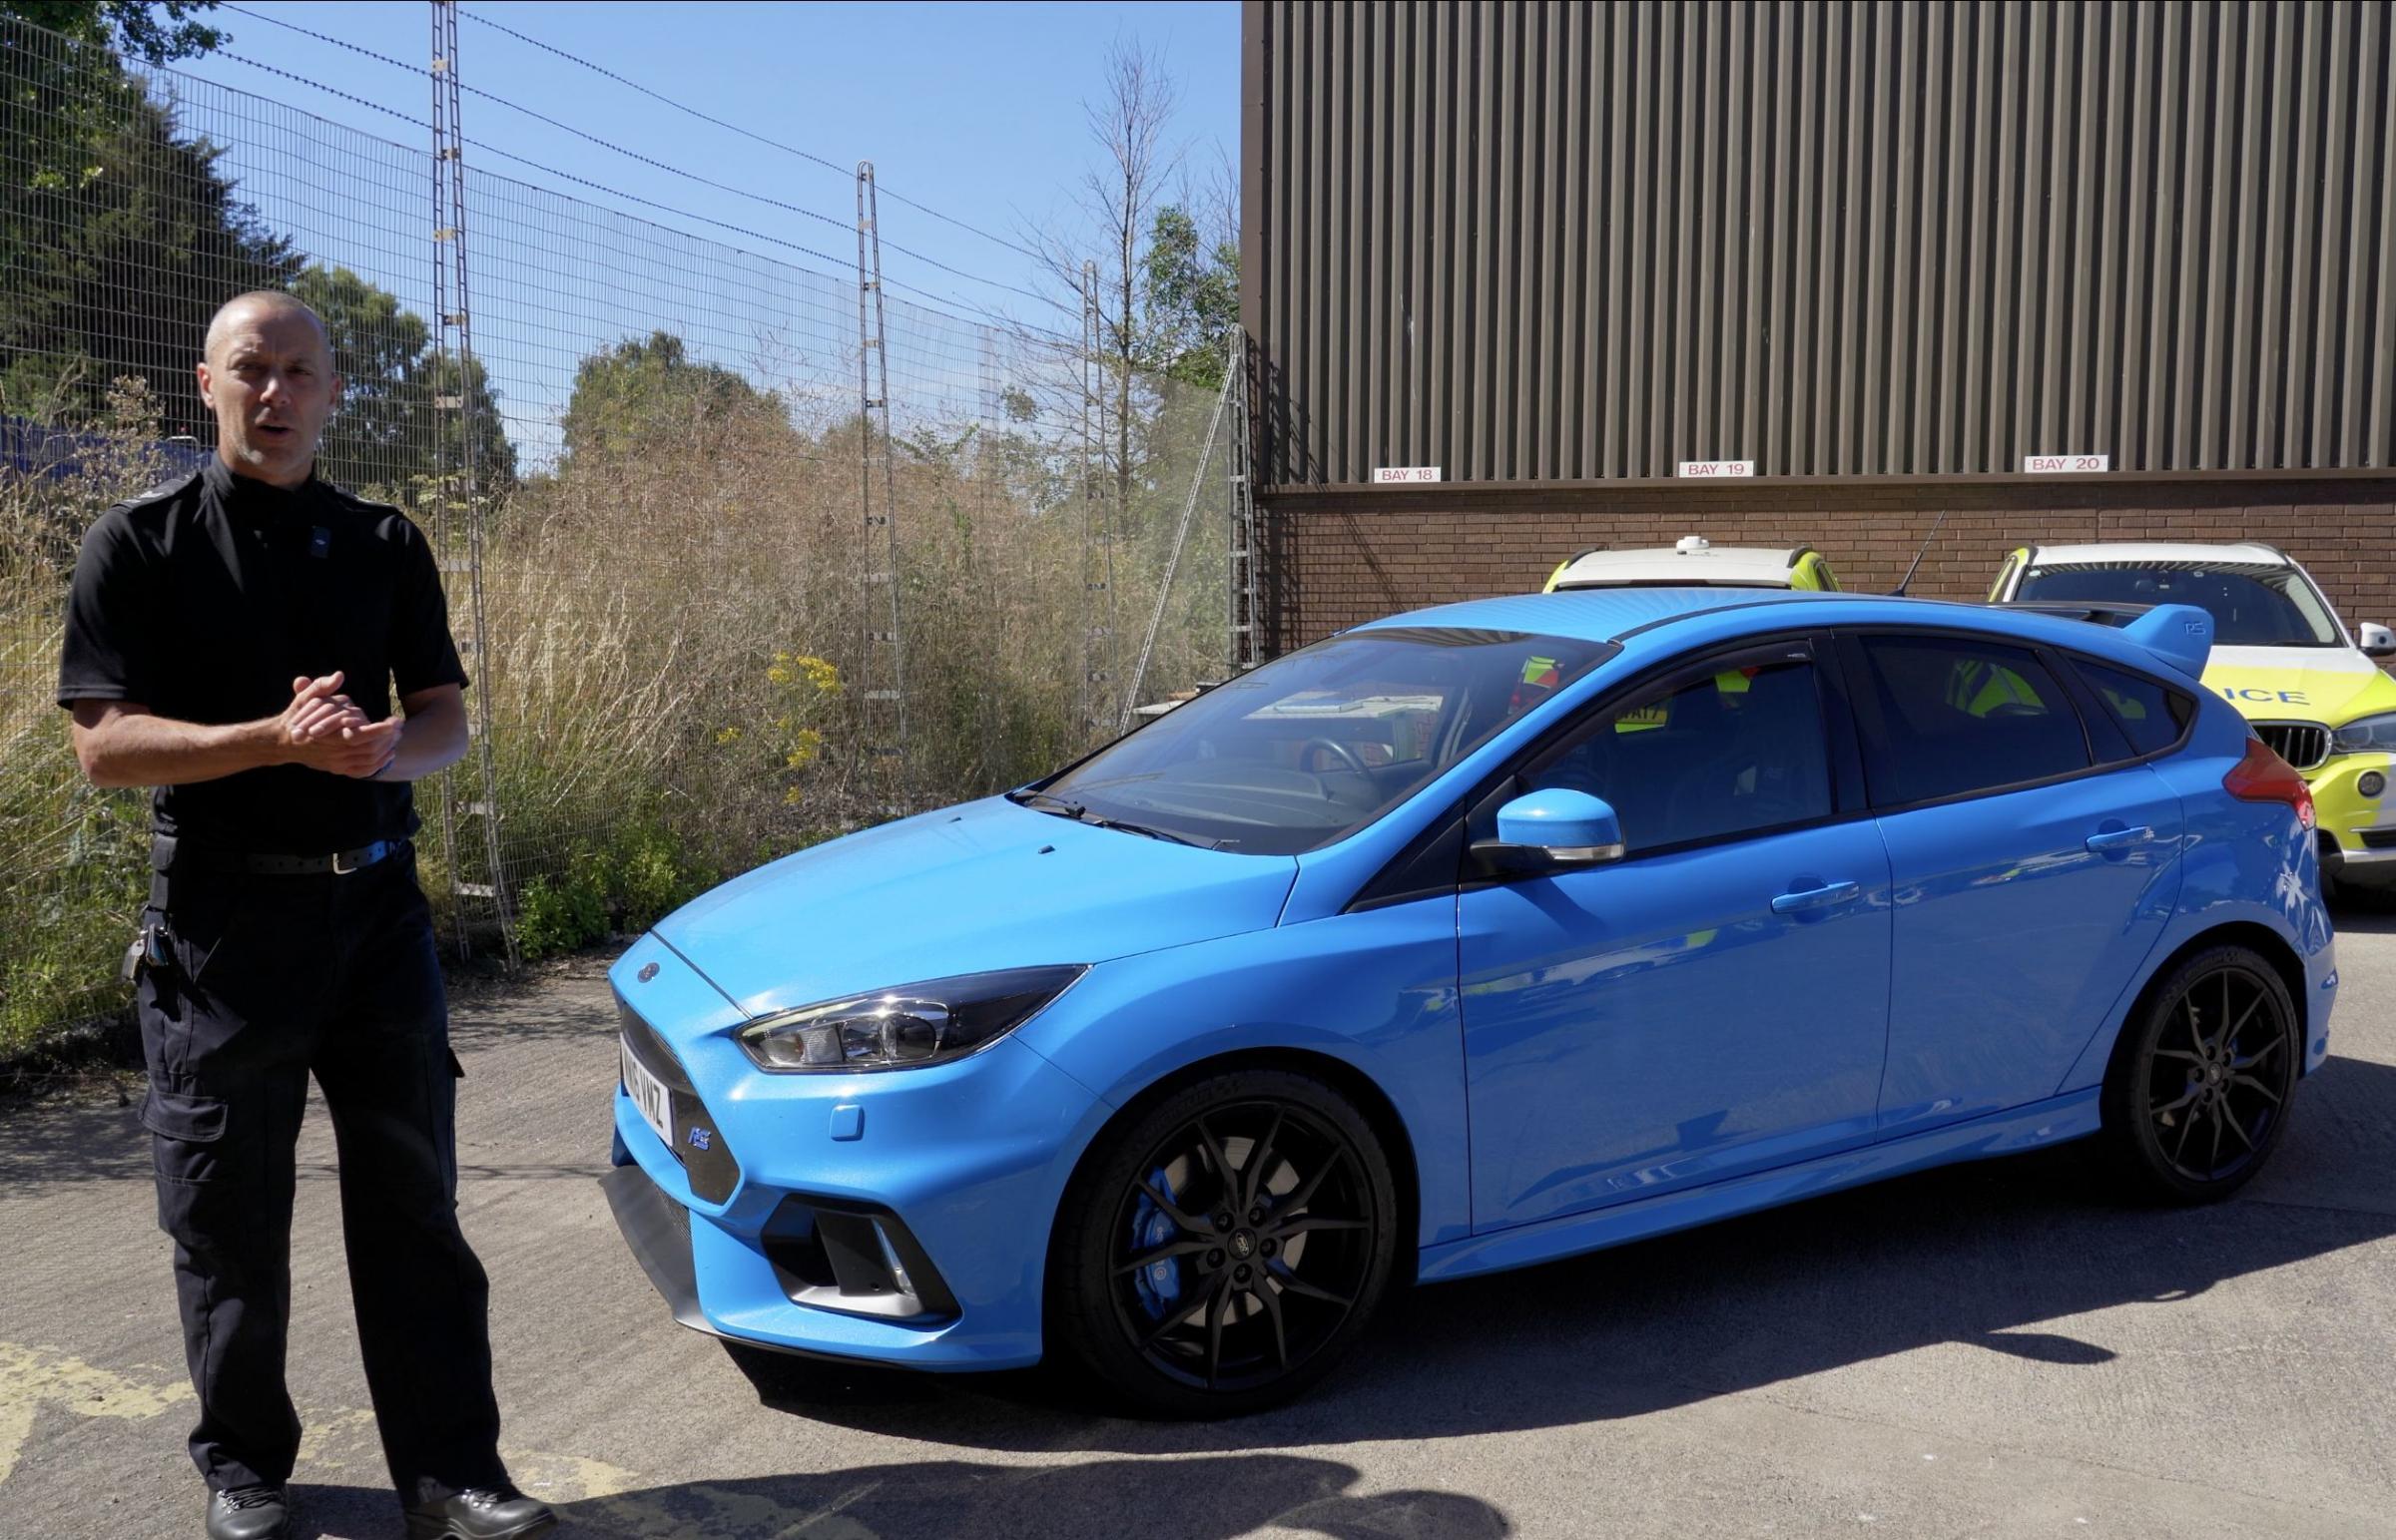 How to modify a Ford Focus RS legally on GCM YouTube channel